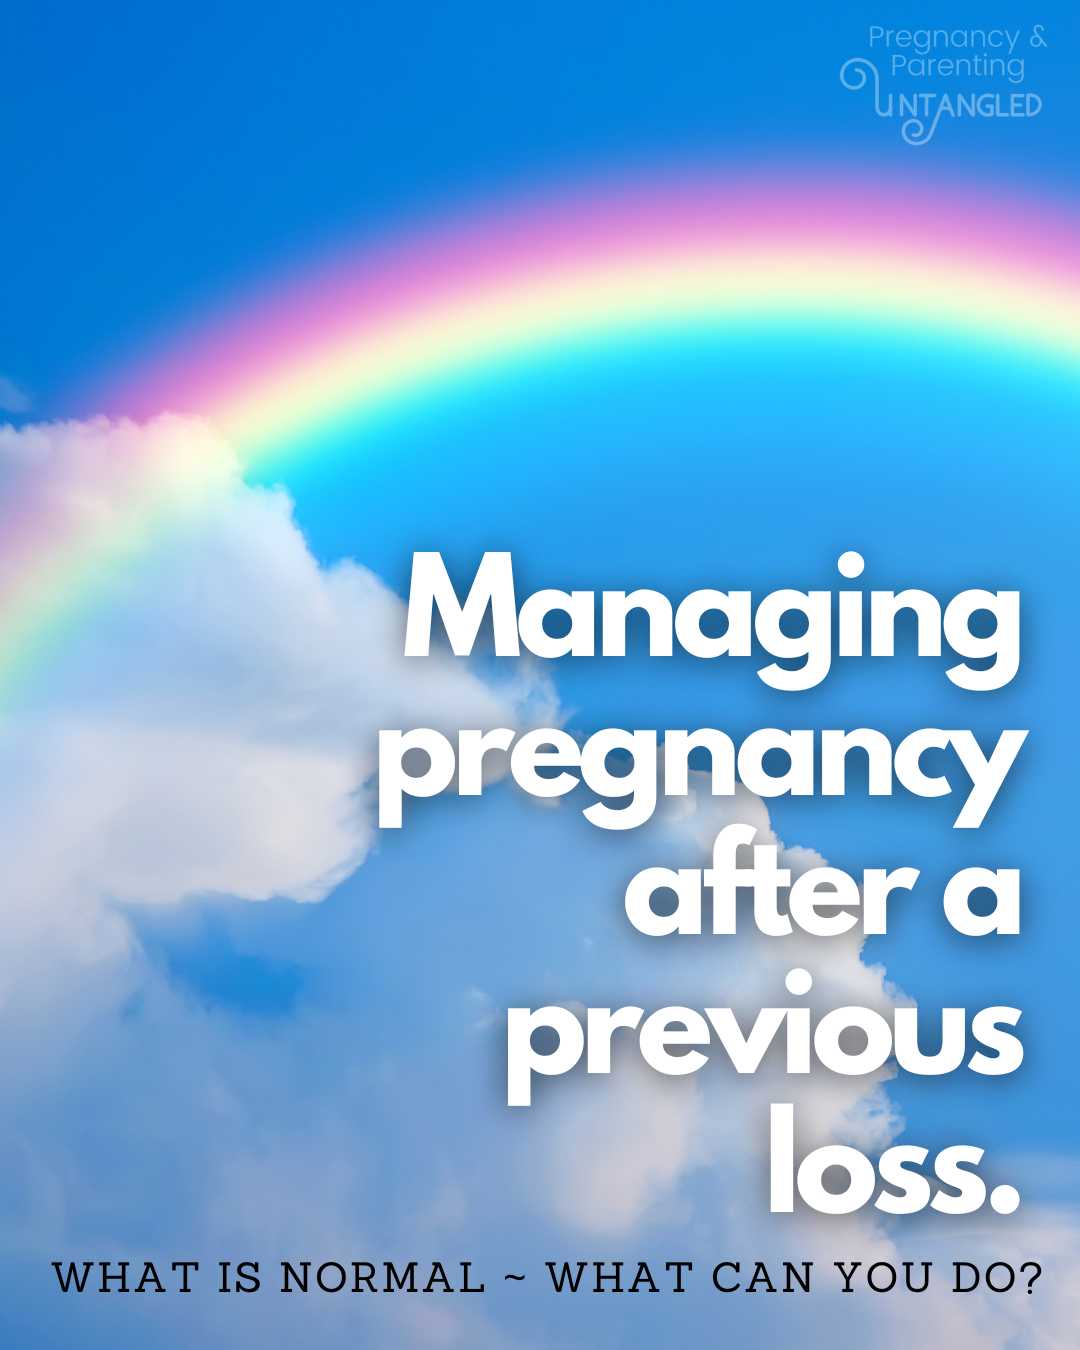 Embracing pregnancy after loss can bring mixed emotions. Discover gentle ways to manage anxiety and find solace during this delicate journey. From seeking support to practicing self-care, empower yourself with strategies to nurture your mental and emotional well-being. You're not alone in this journey. #MomToBe" Pregnancy after loss Anxiety management Self-care Mom-to-be Pregnancy anxiety Pregnancy loss support Coping strategies Emotional well-being Maternity insights Healing journey via @pullingcurls